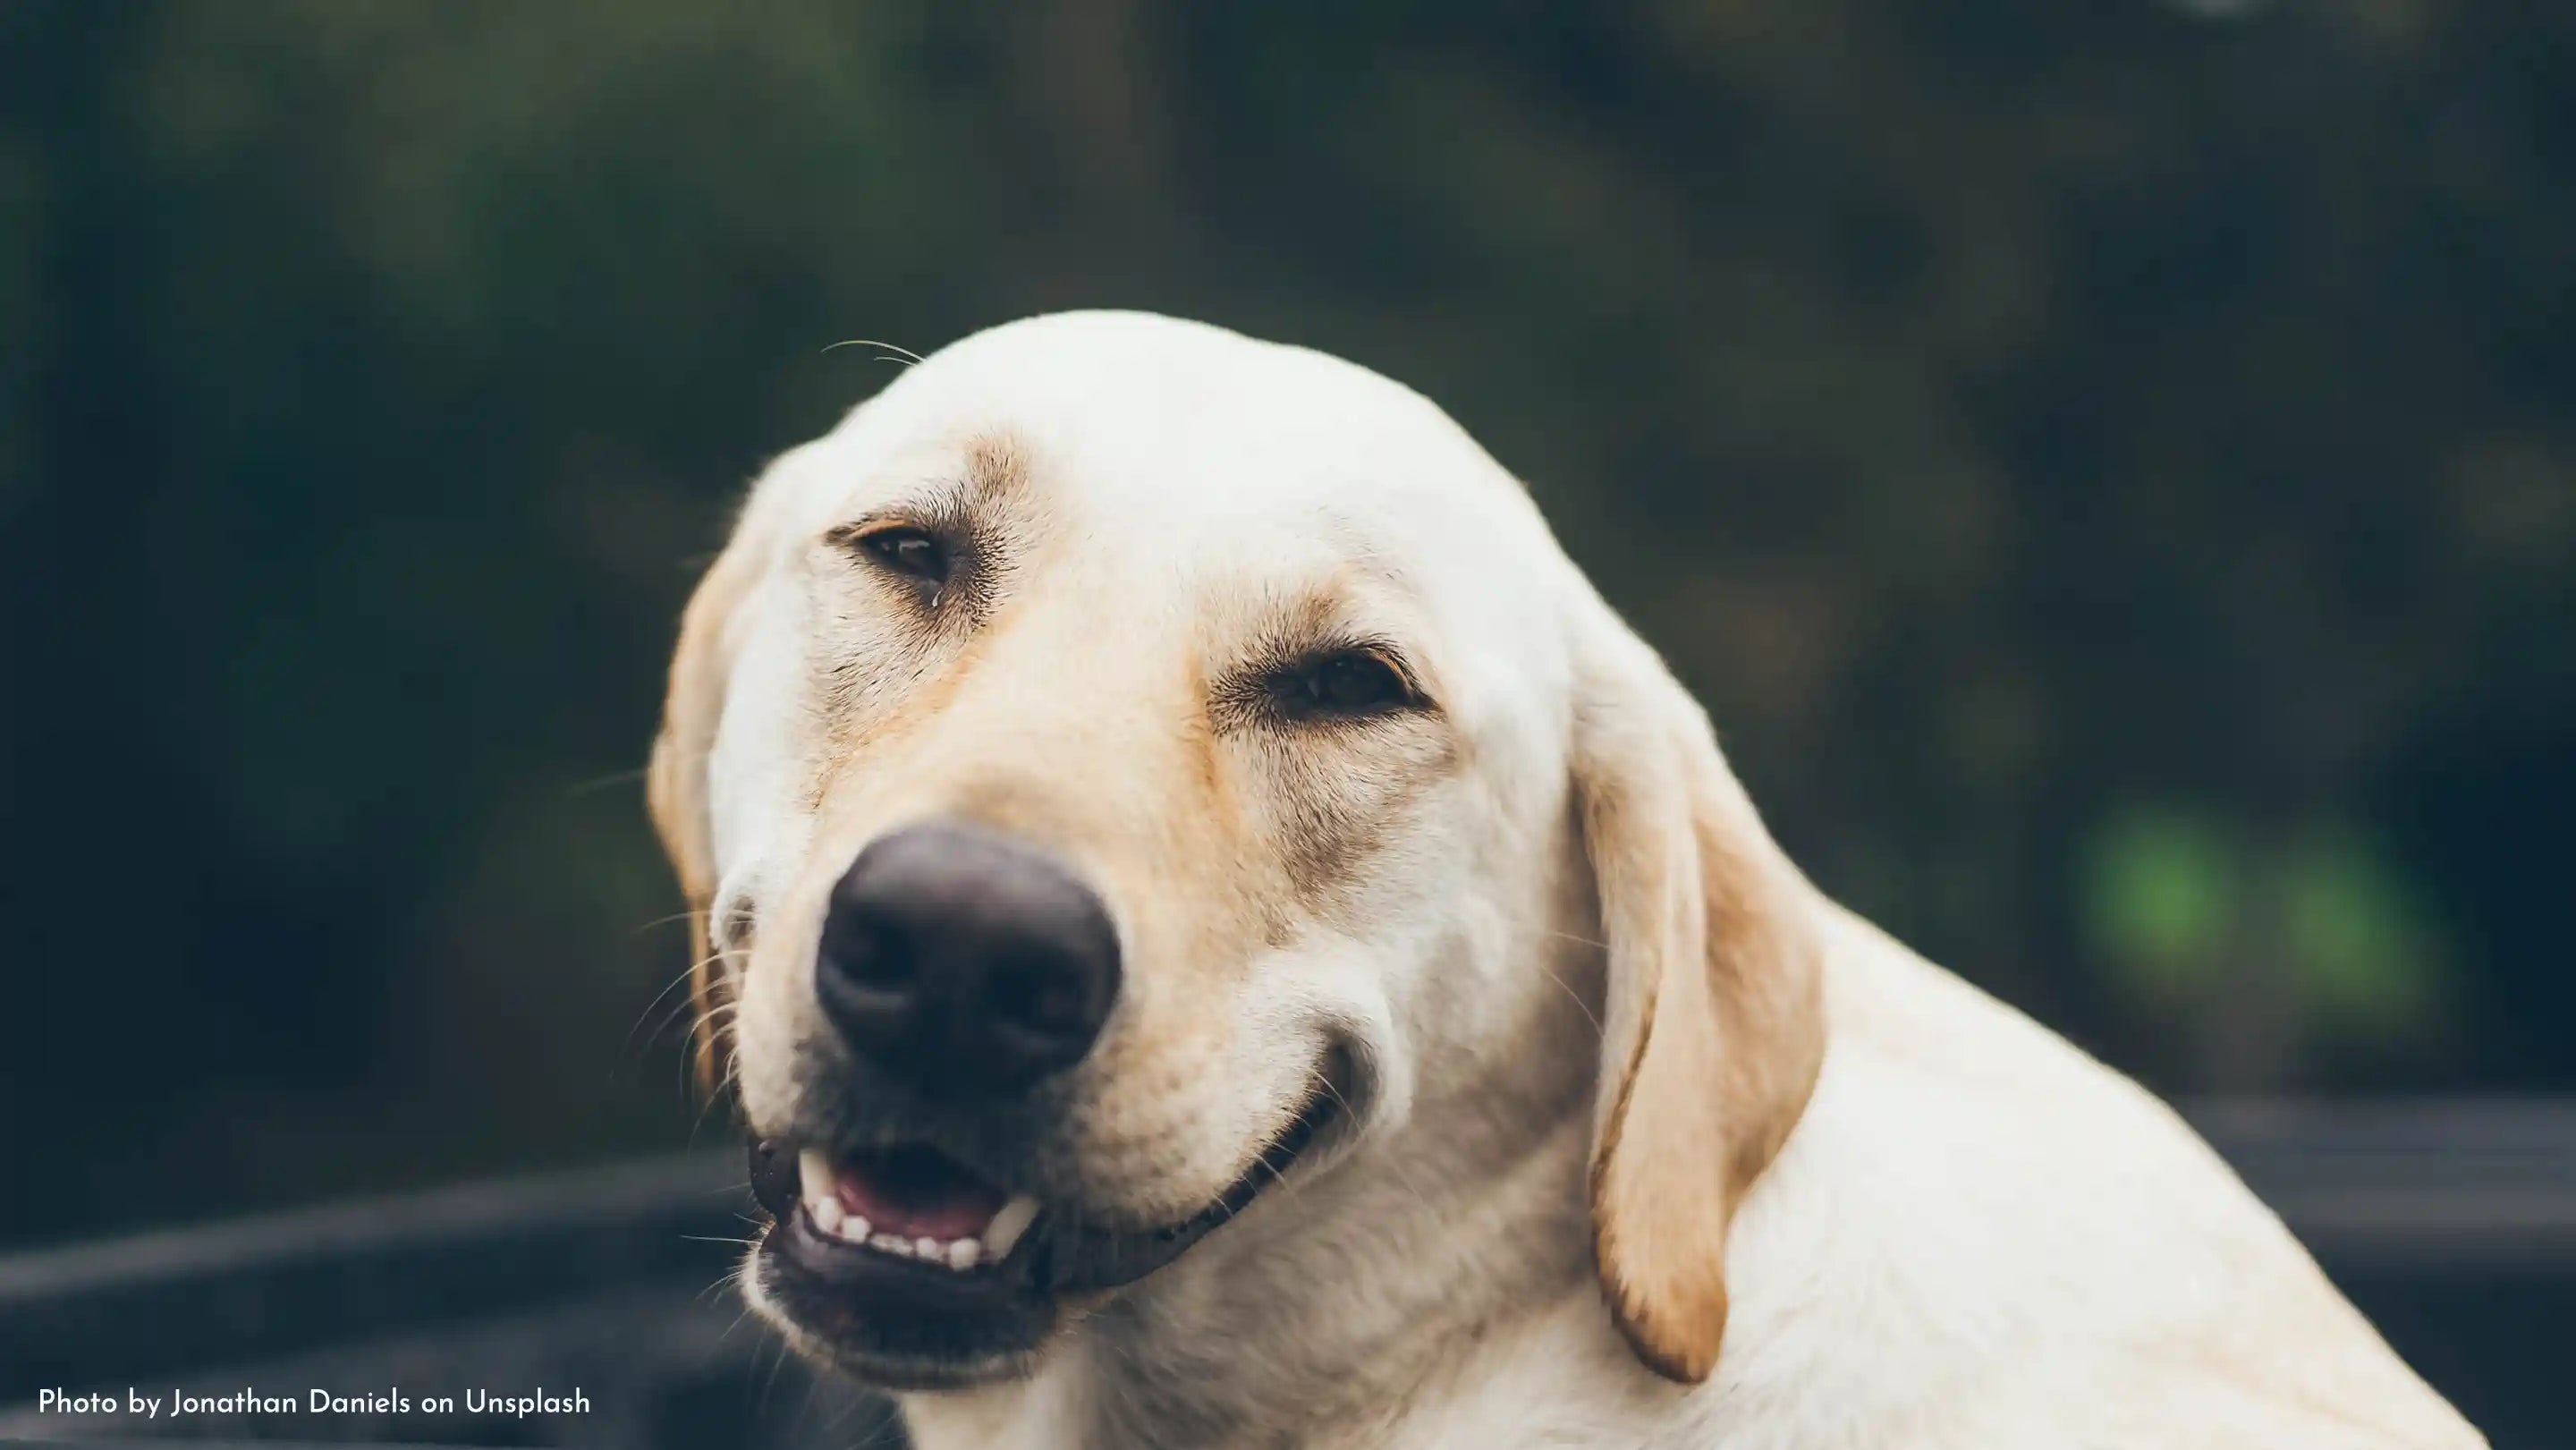 A smiling dog